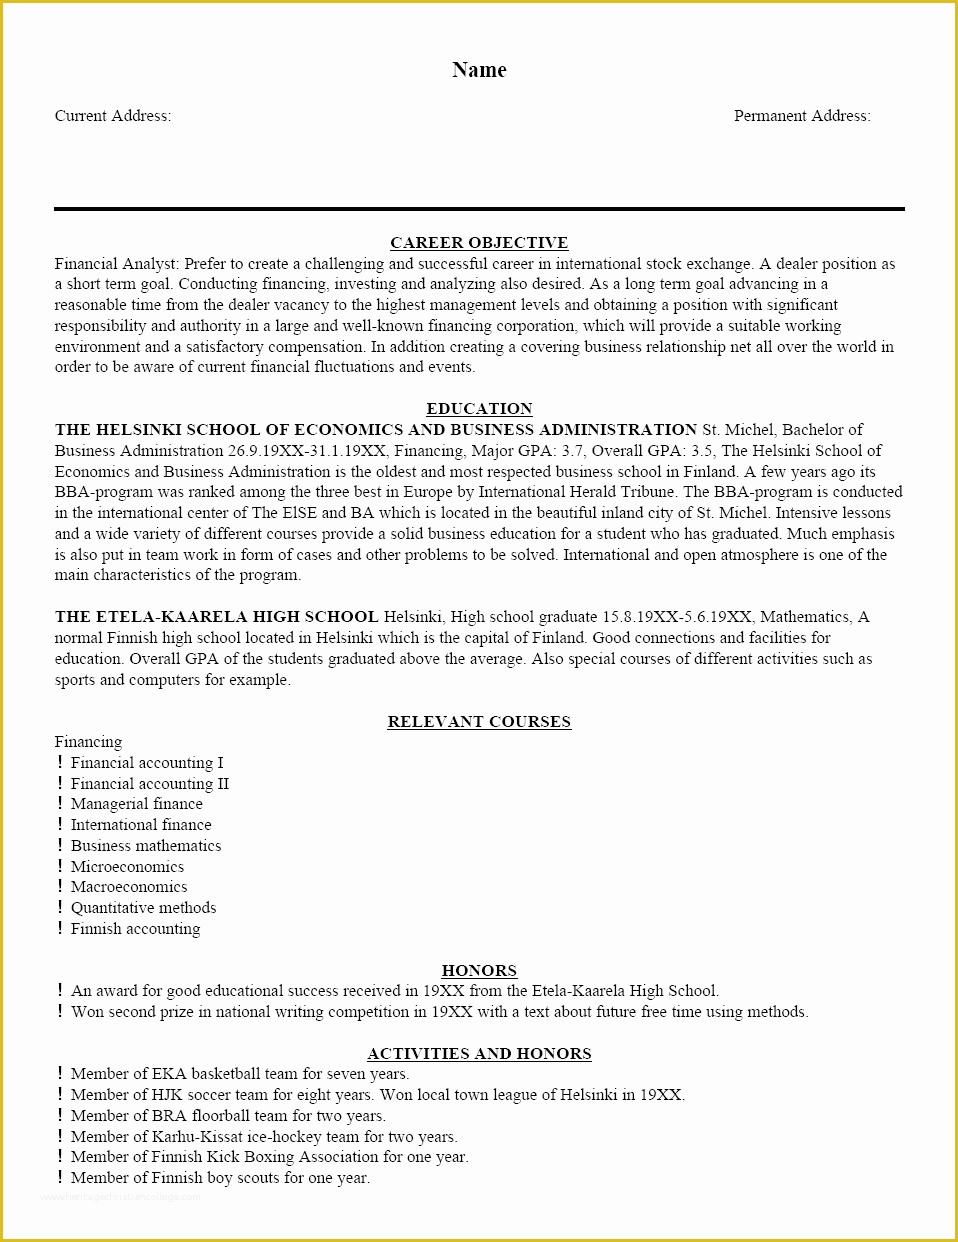 Free Resume Outline Template Of Free Sample Resume Template Cover Letter and Resume